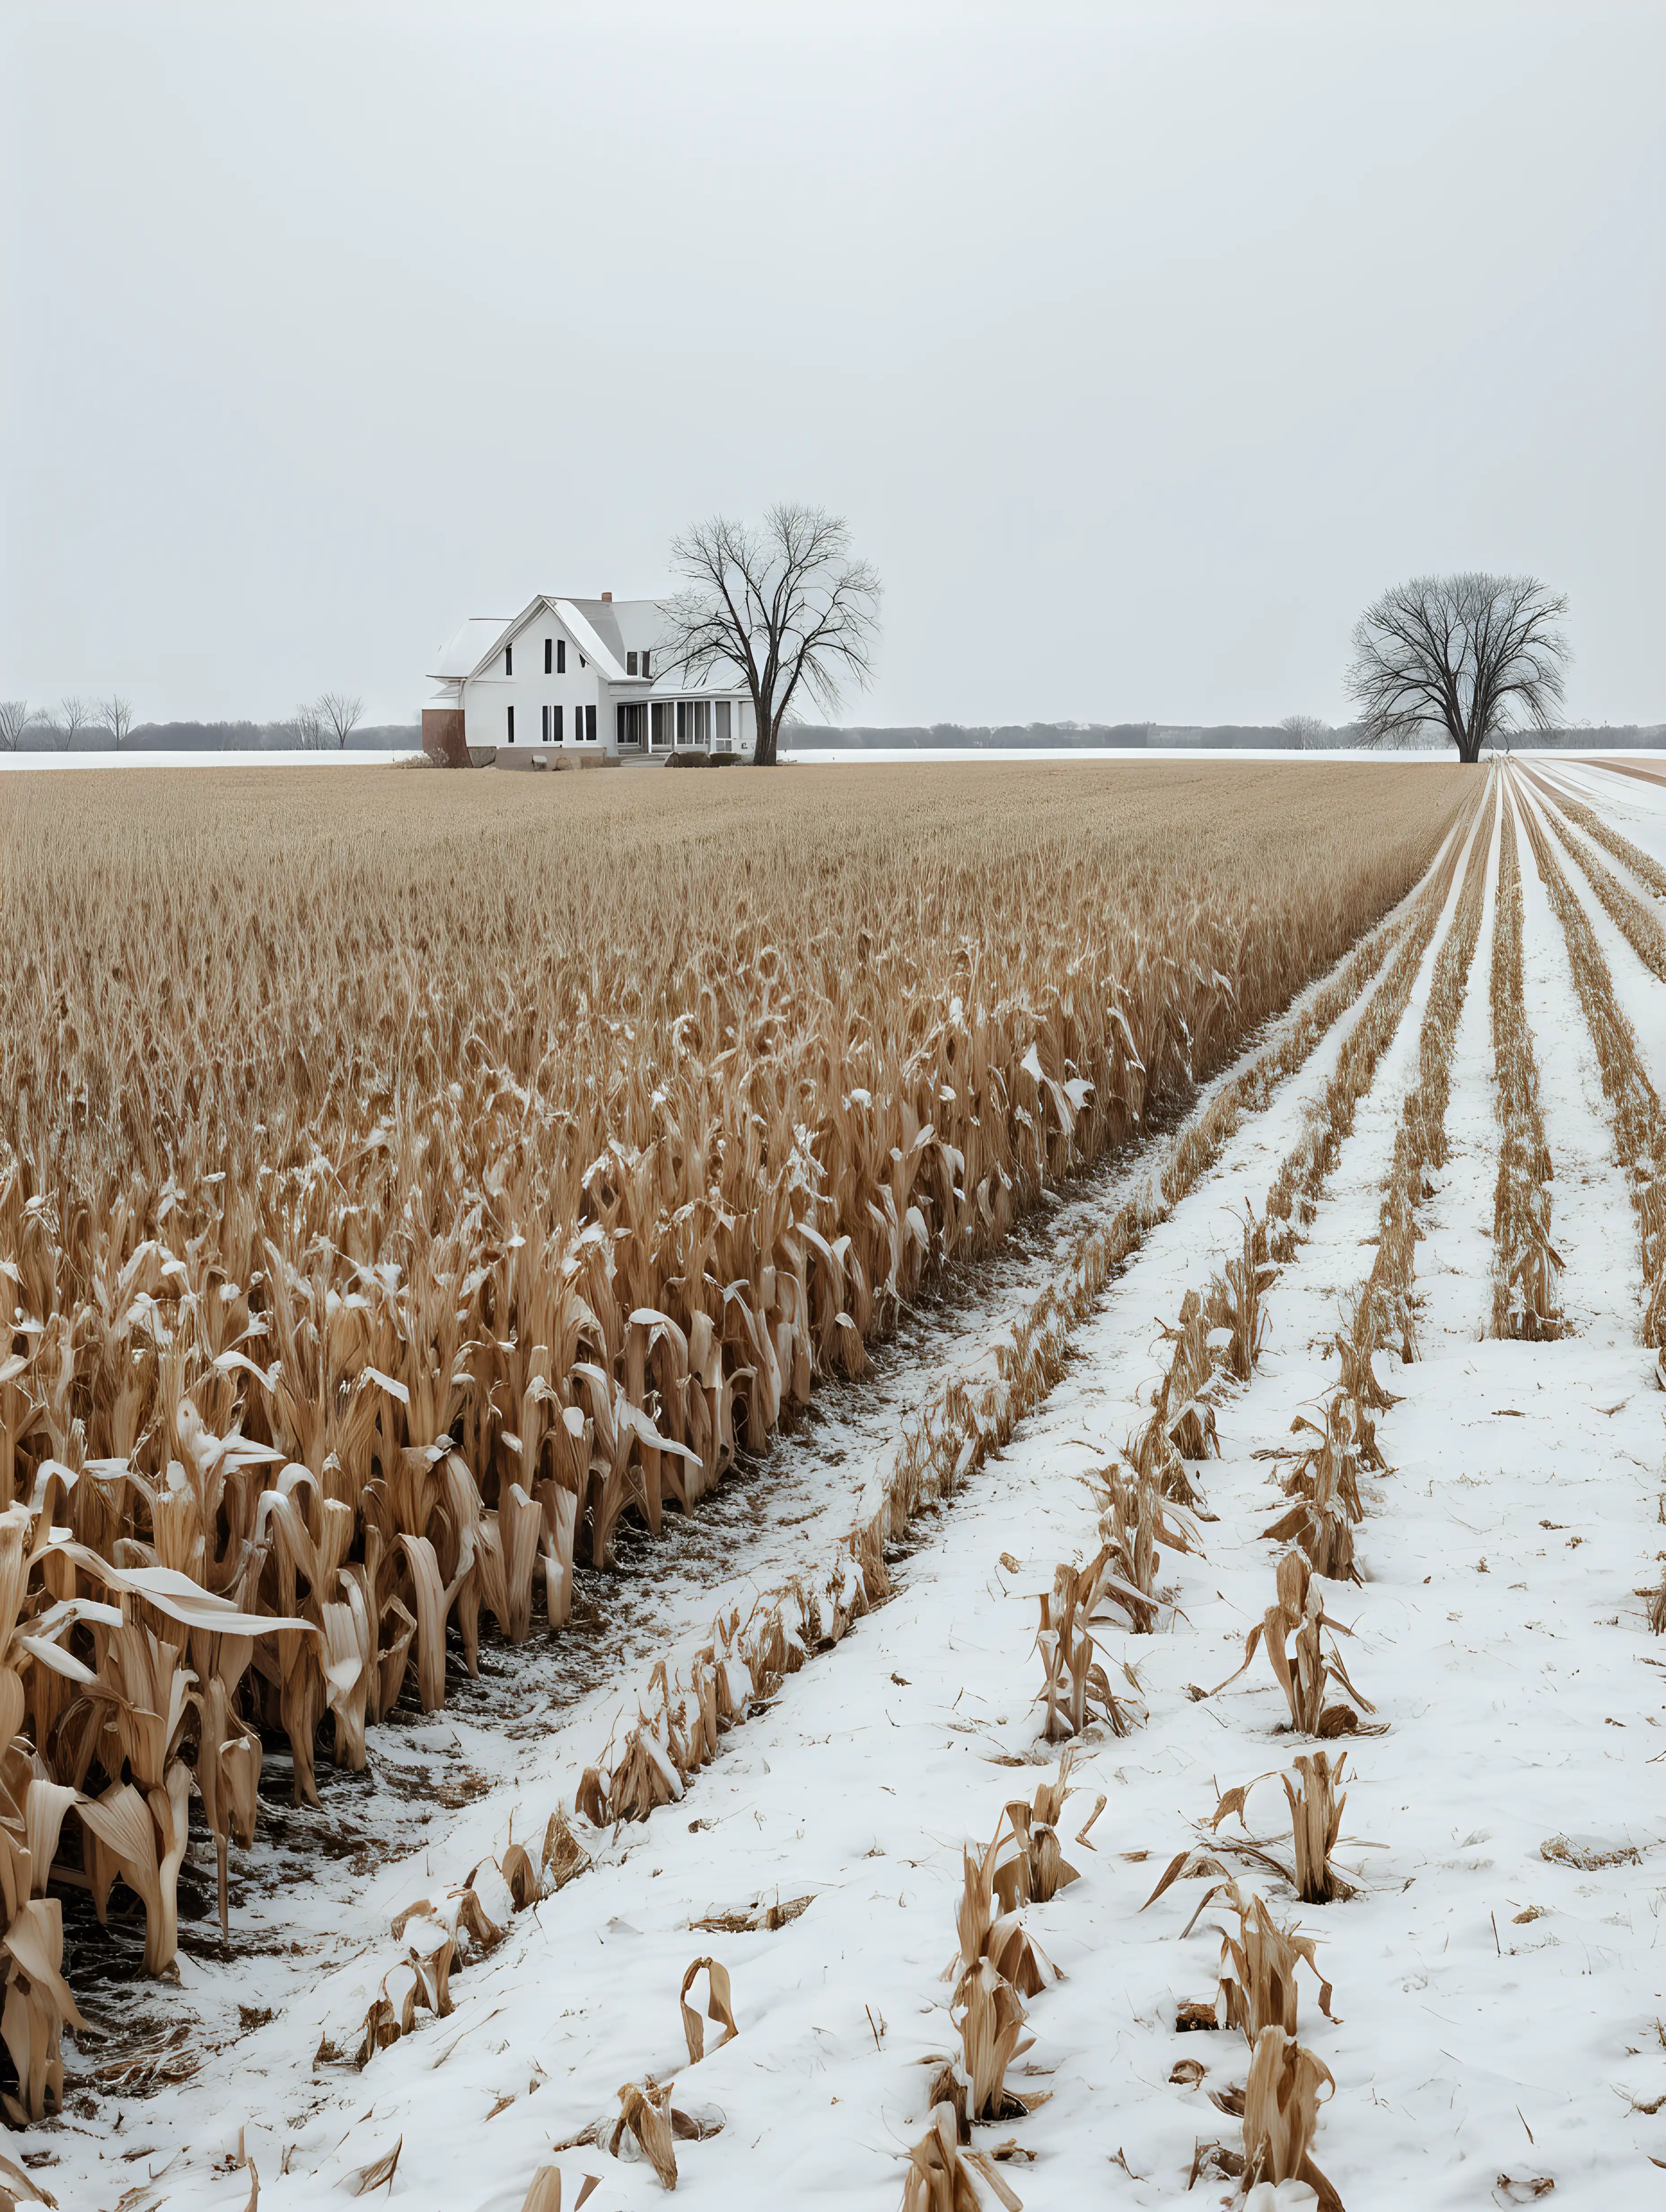 dead tall cornfield to the side, light snow on the ground, cloudy day, house in the distance, midwest